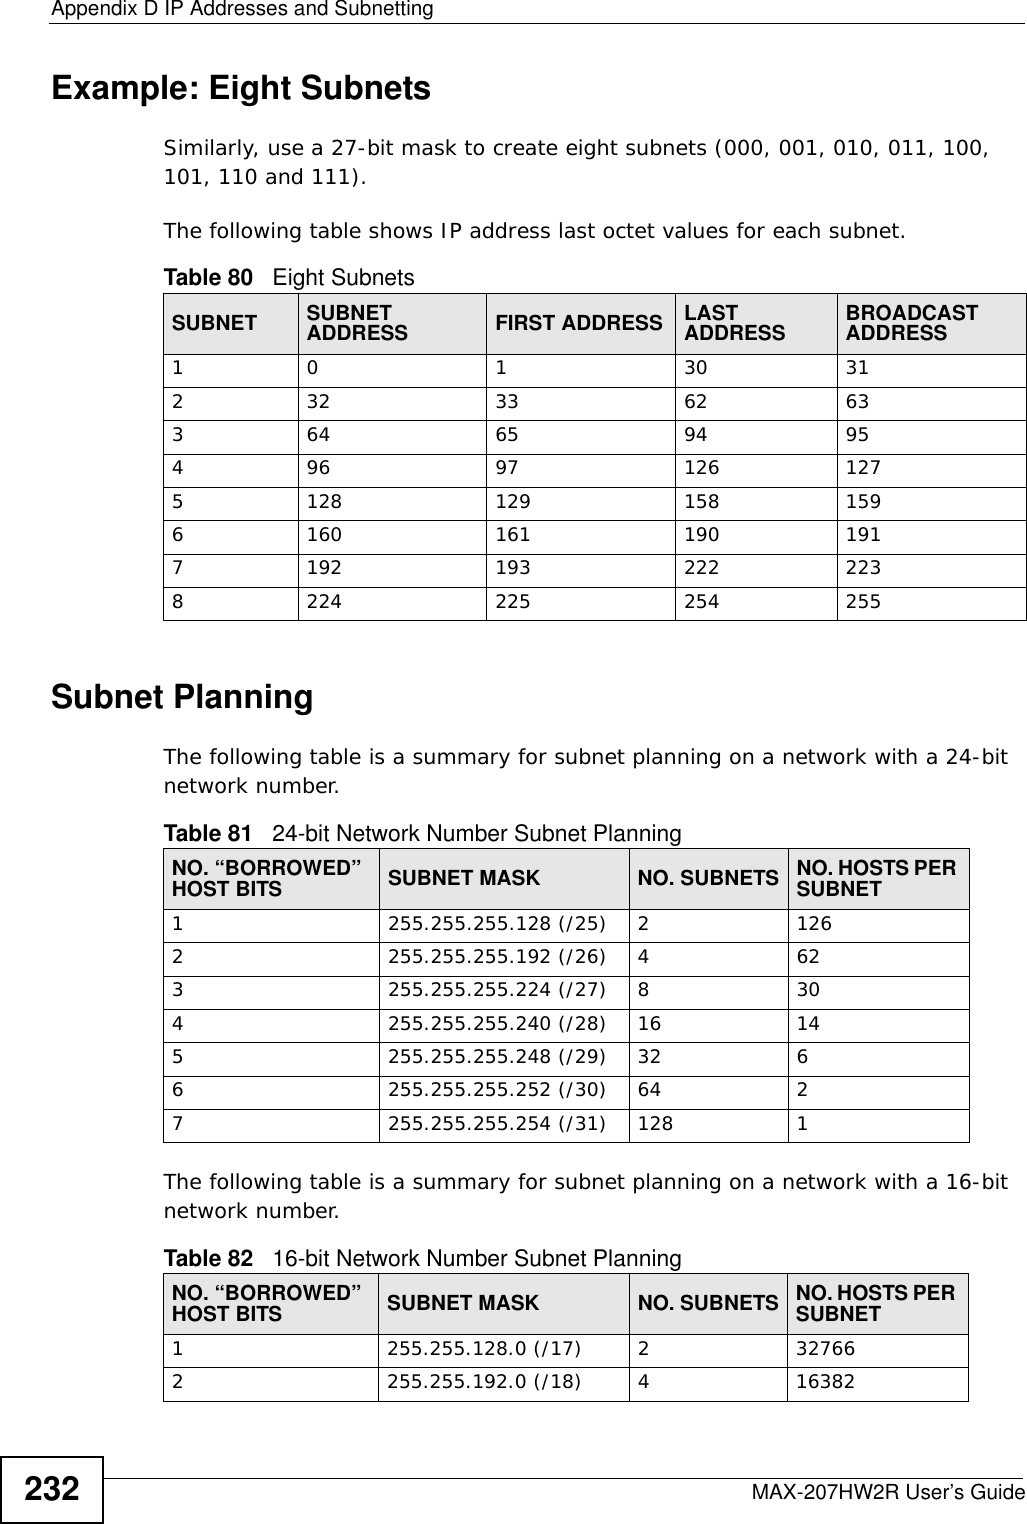 Appendix D IP Addresses and SubnettingMAX-207HW2R User’s Guide232Example: Eight SubnetsSimilarly, use a 27-bit mask to create eight subnets (000, 001, 010, 011, 100, 101, 110 and 111). The following table shows IP address last octet values for each subnet.Subnet PlanningThe following table is a summary for subnet planning on a network with a 24-bit network number.The following table is a summary for subnet planning on a network with a 16-bit network number. Table 80   Eight SubnetsSUBNET SUBNET ADDRESS FIRST ADDRESS LAST ADDRESS BROADCAST ADDRESS1 0 1 30 31232 33 62 63364 65 94 95496 97 126 1275128 129 158 1596160 161 190 1917192 193 222 2238224 225 254 255Table 81   24-bit Network Number Subnet PlanningNO. “BORROWED” HOST BITS SUBNET MASK NO. SUBNETS NO. HOSTS PER SUBNET1255.255.255.128 (/25) 21262255.255.255.192 (/26) 4623255.255.255.224 (/27) 8304255.255.255.240 (/28) 16 145255.255.255.248 (/29) 32 66255.255.255.252 (/30) 64 27255.255.255.254 (/31) 128 1Table 82   16-bit Network Number Subnet PlanningNO. “BORROWED” HOST BITS SUBNET MASK NO. SUBNETS NO. HOSTS PER SUBNET1255.255.128.0 (/17) 2327662255.255.192.0 (/18) 416382